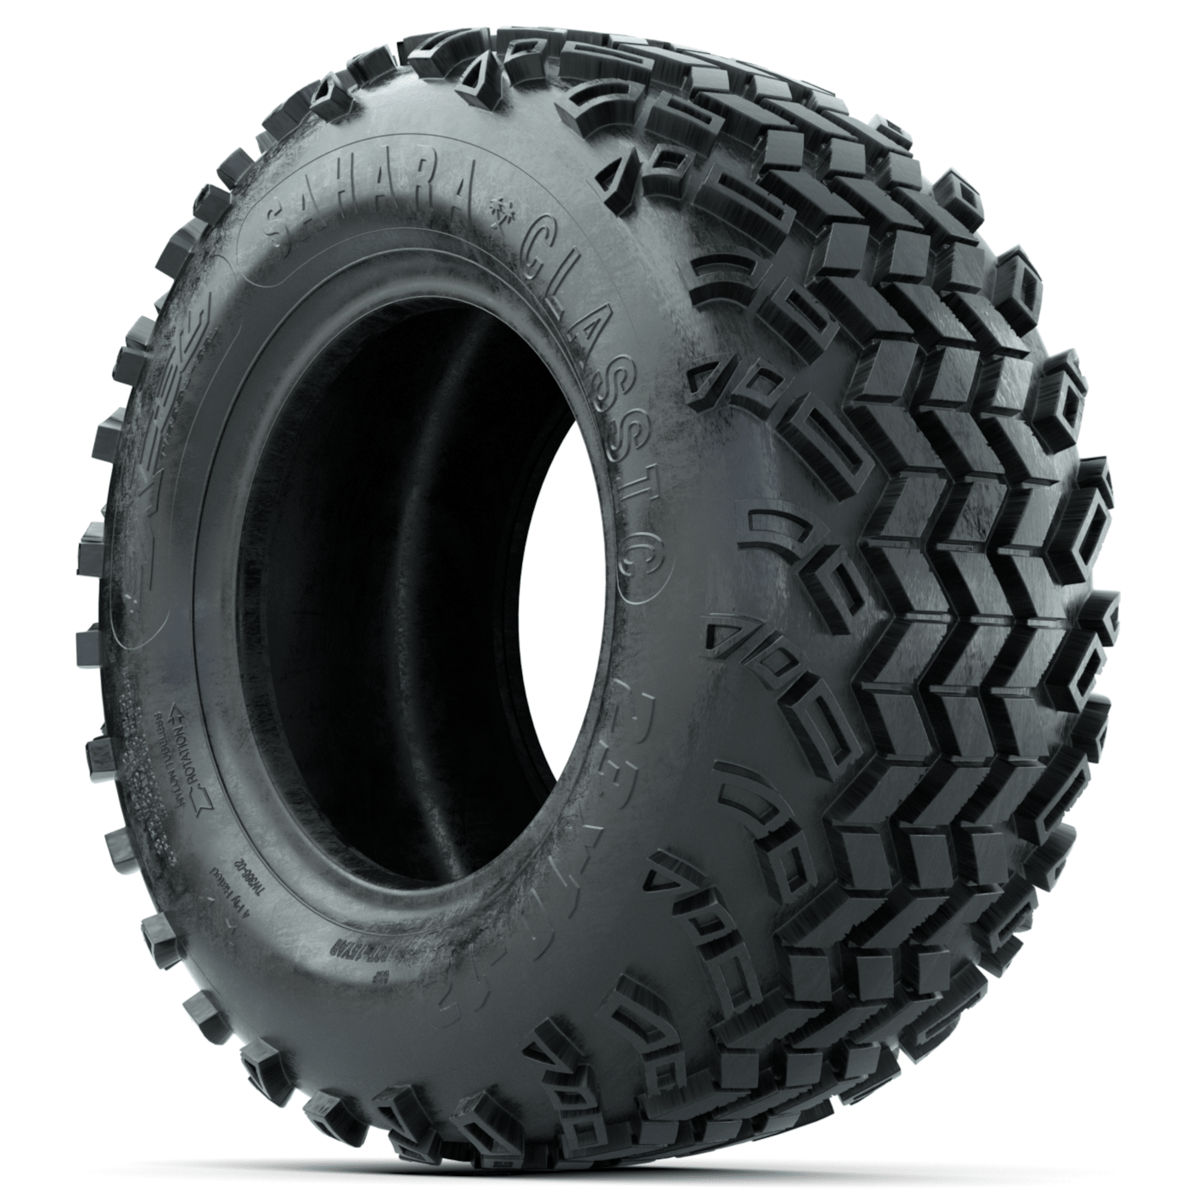 23x10-12 Sahara Classic A / T Tire (Lift Required)